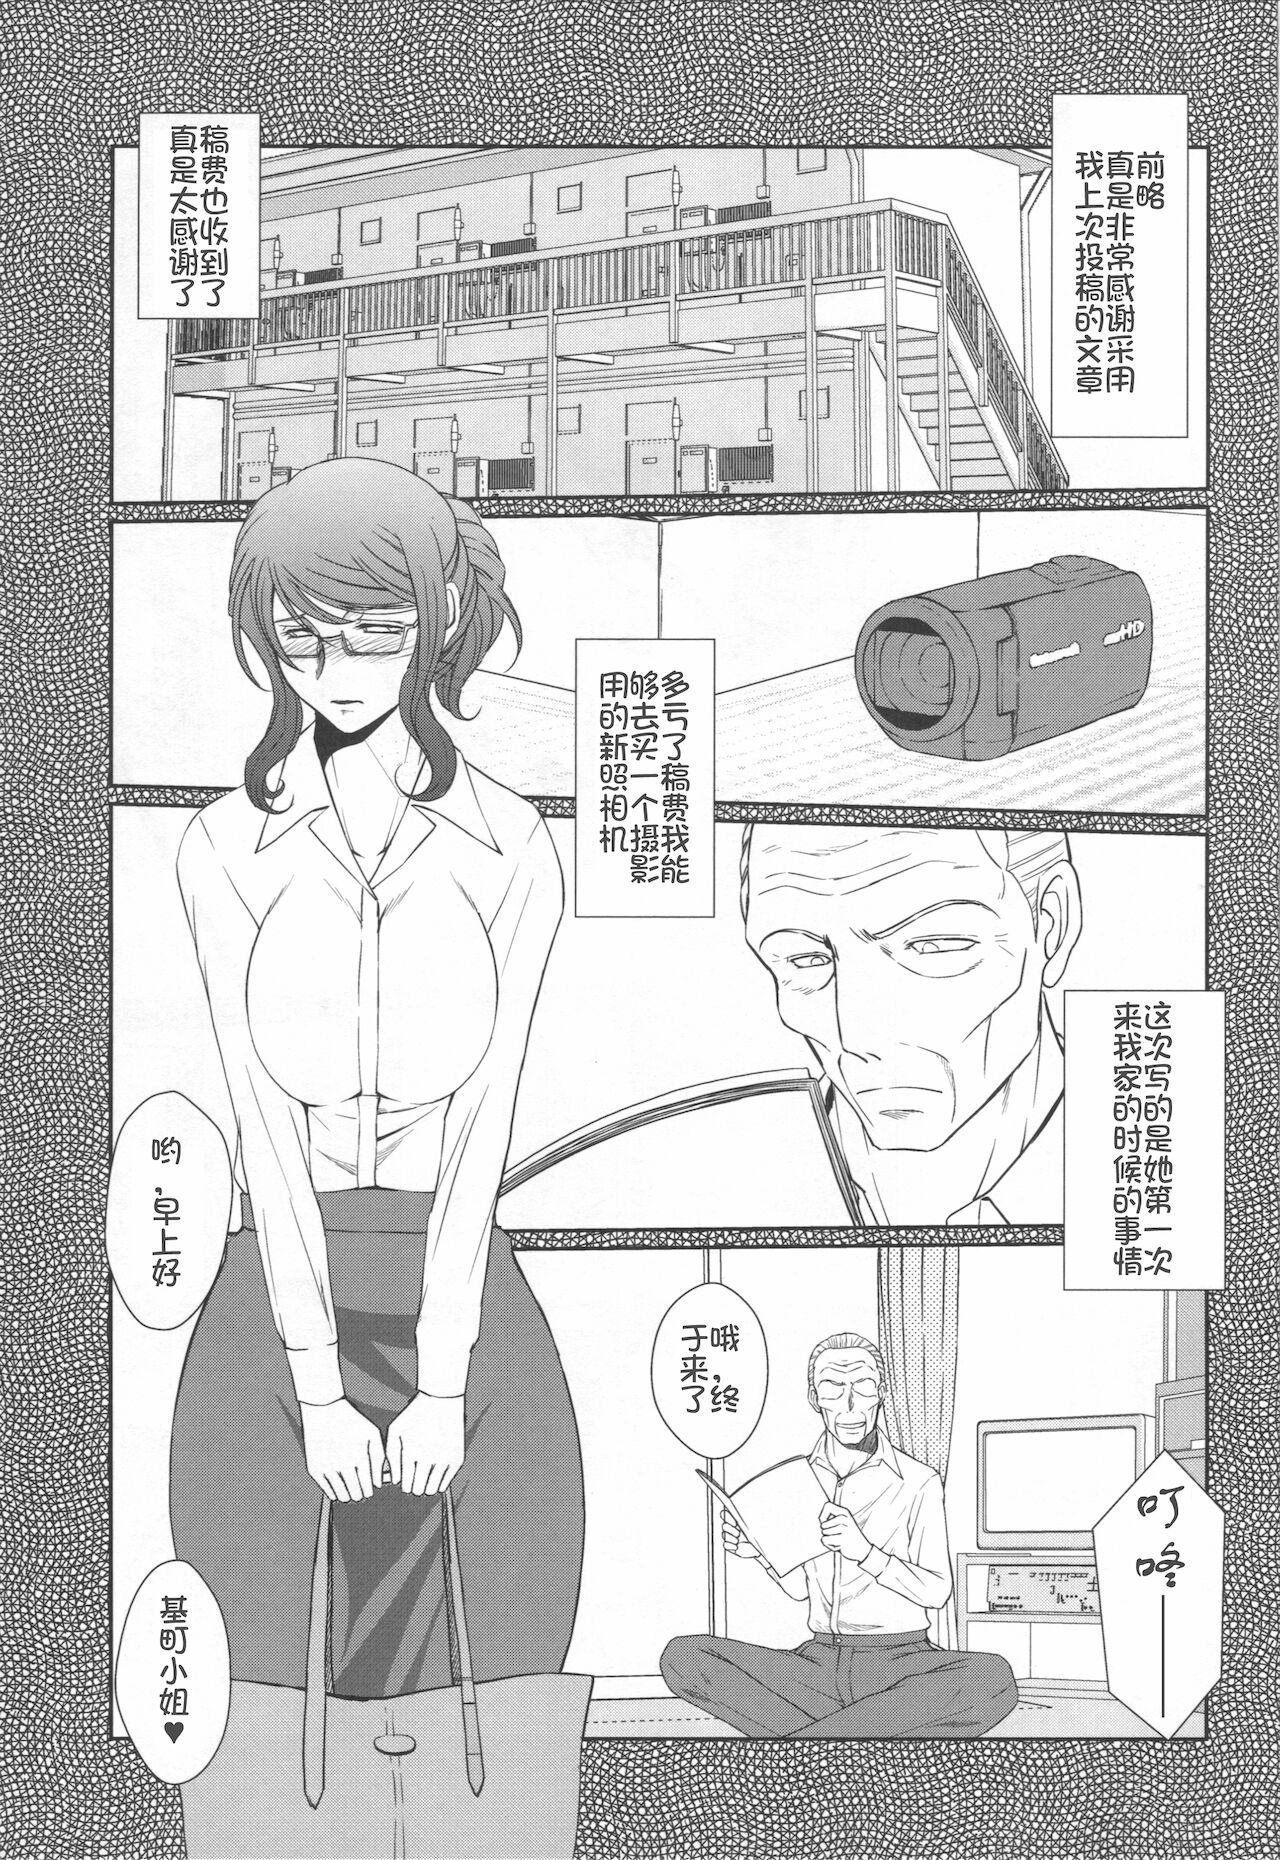 Butt Sex Zoku Akai Boushi no Onna - Woman with a red cap - Kyuujou lovers Cocks - Page 3